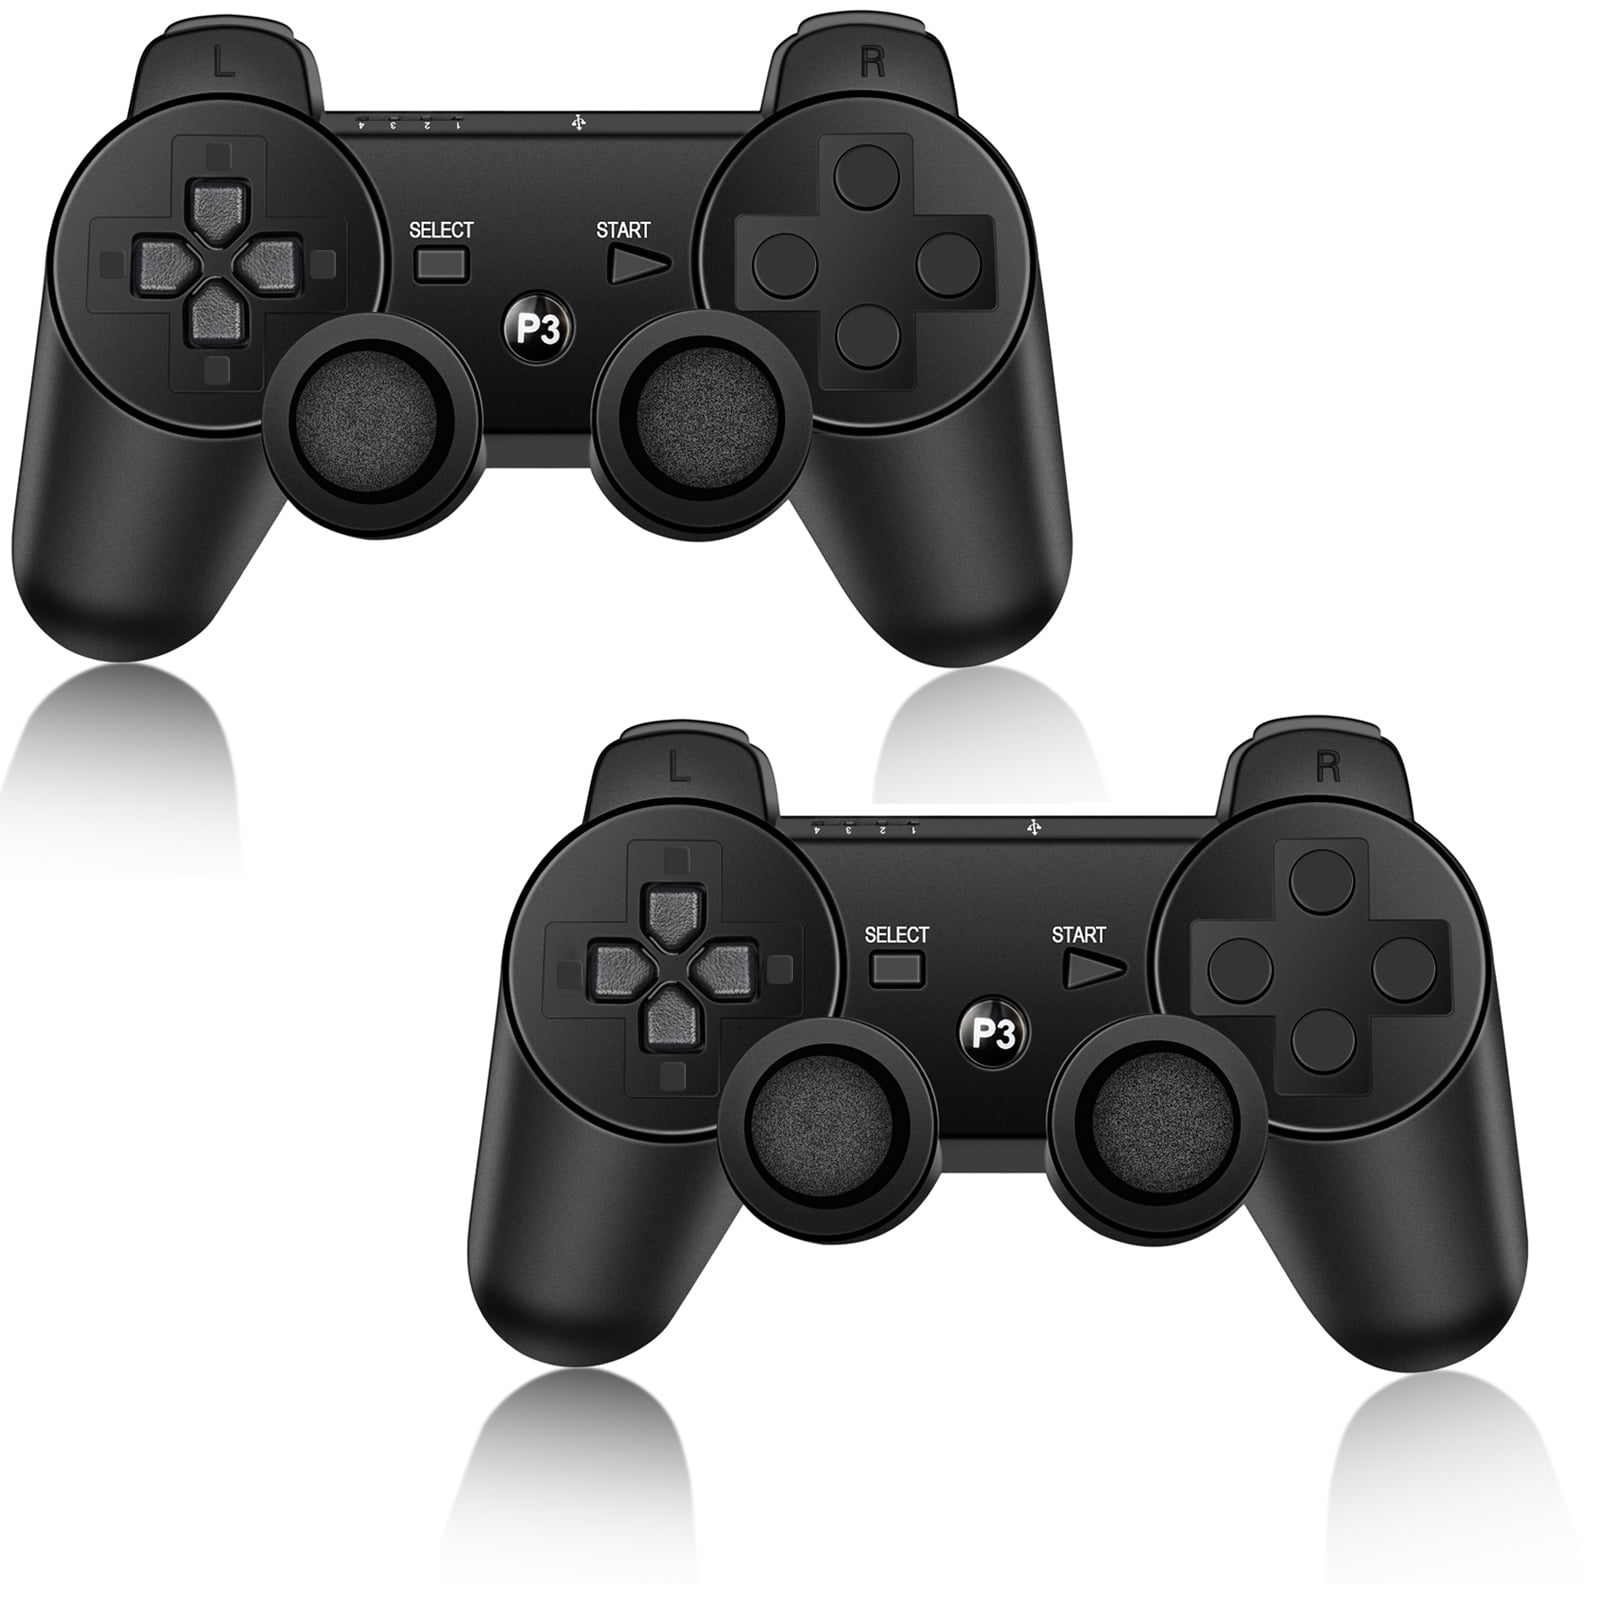 PS3 Controller Dual Shock 3 controller Black Sony (Used) - Walmart.com